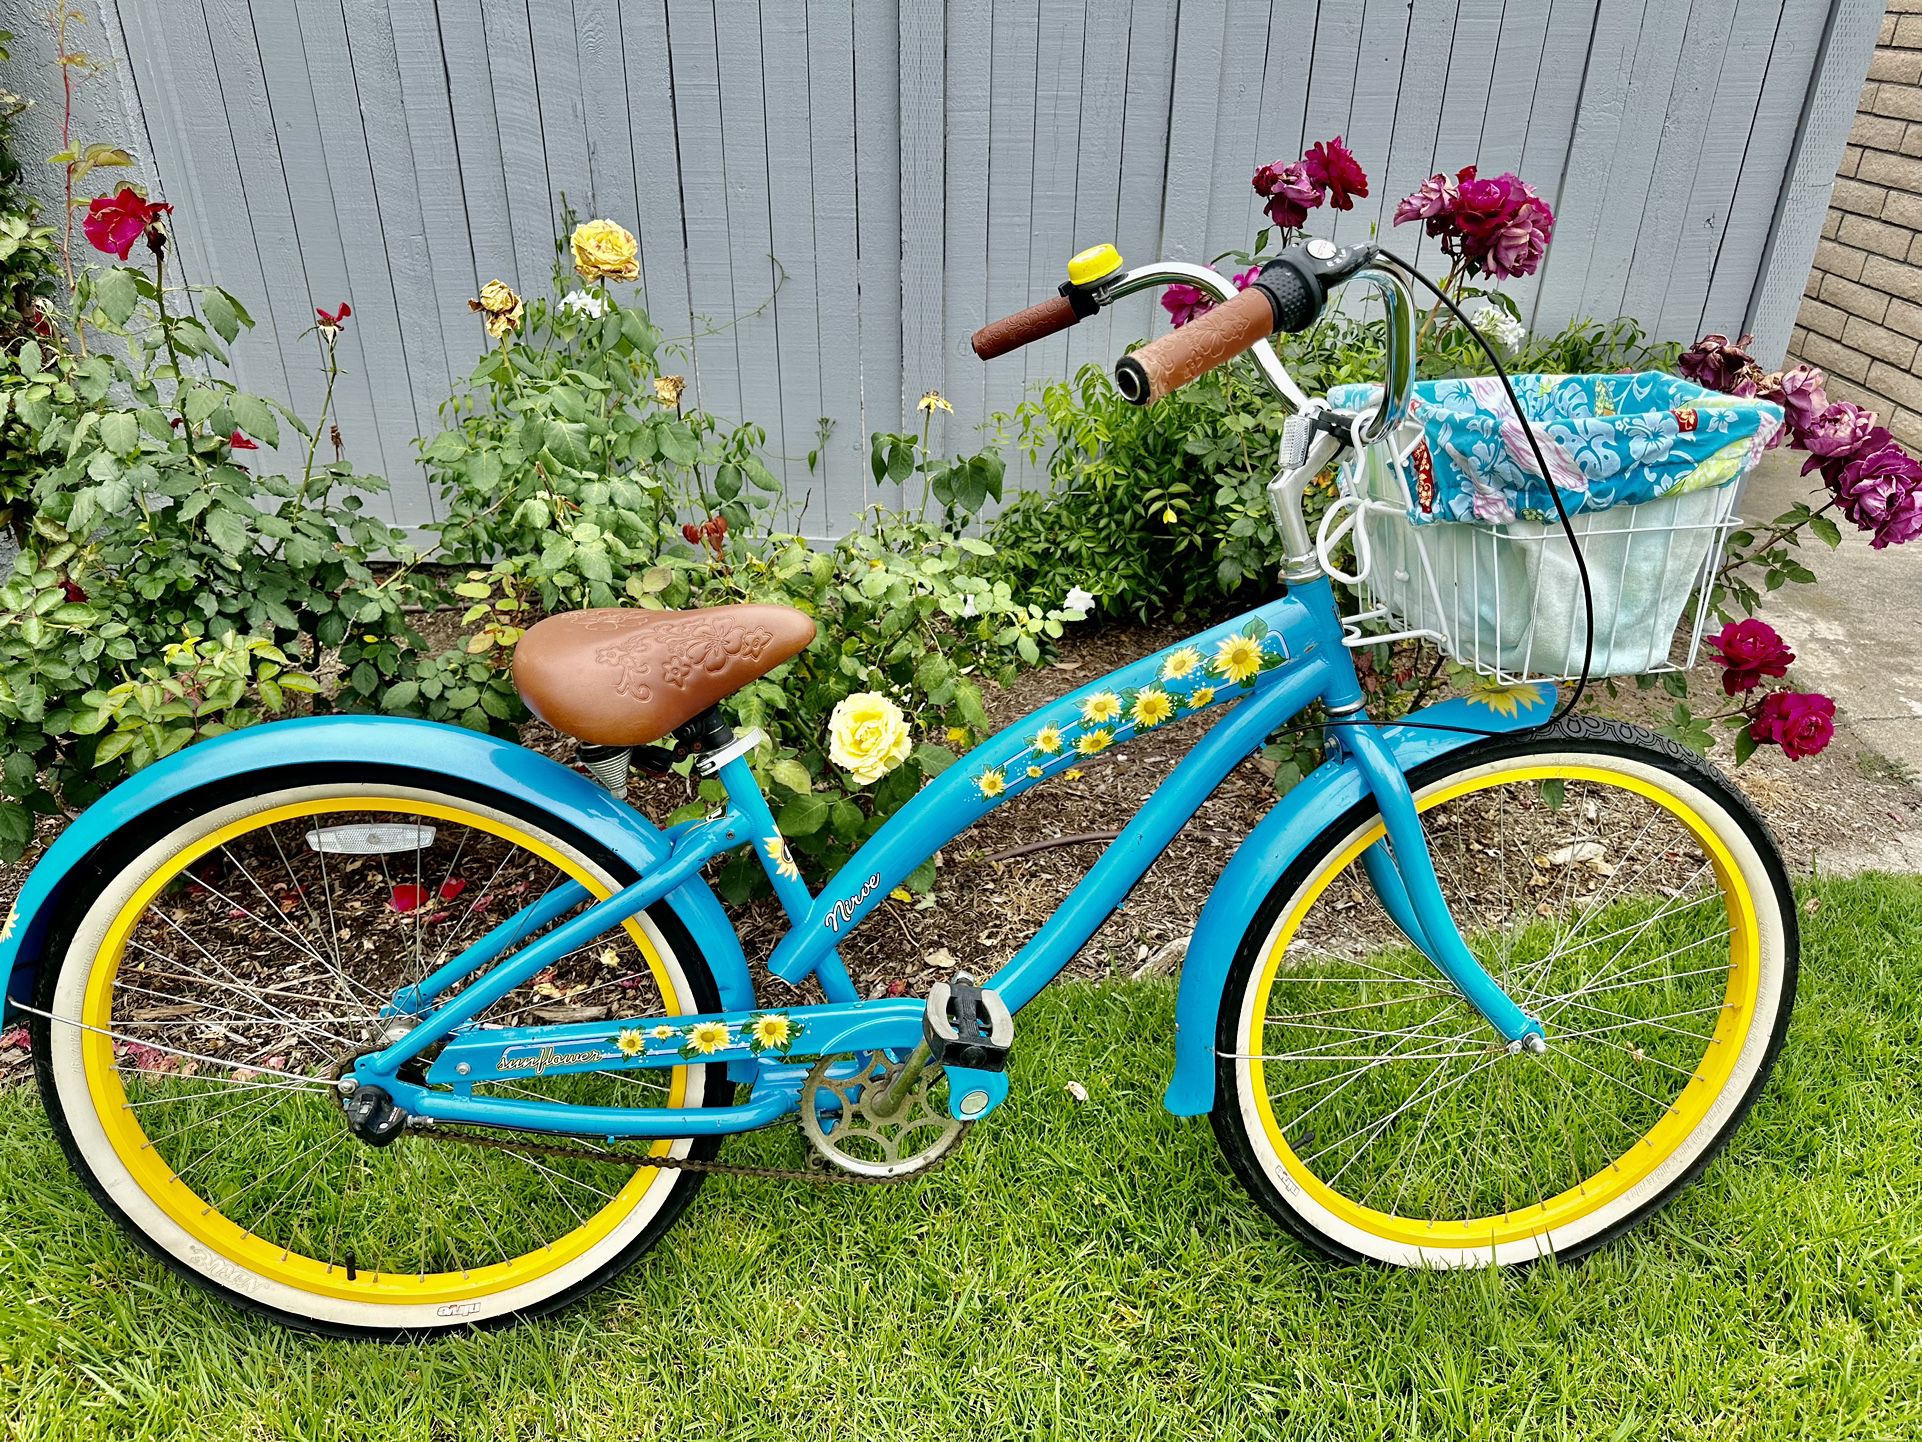 🌻 Adorable Sunflower  3 Speed Cruiser, fabric, covered basket, and helmet included